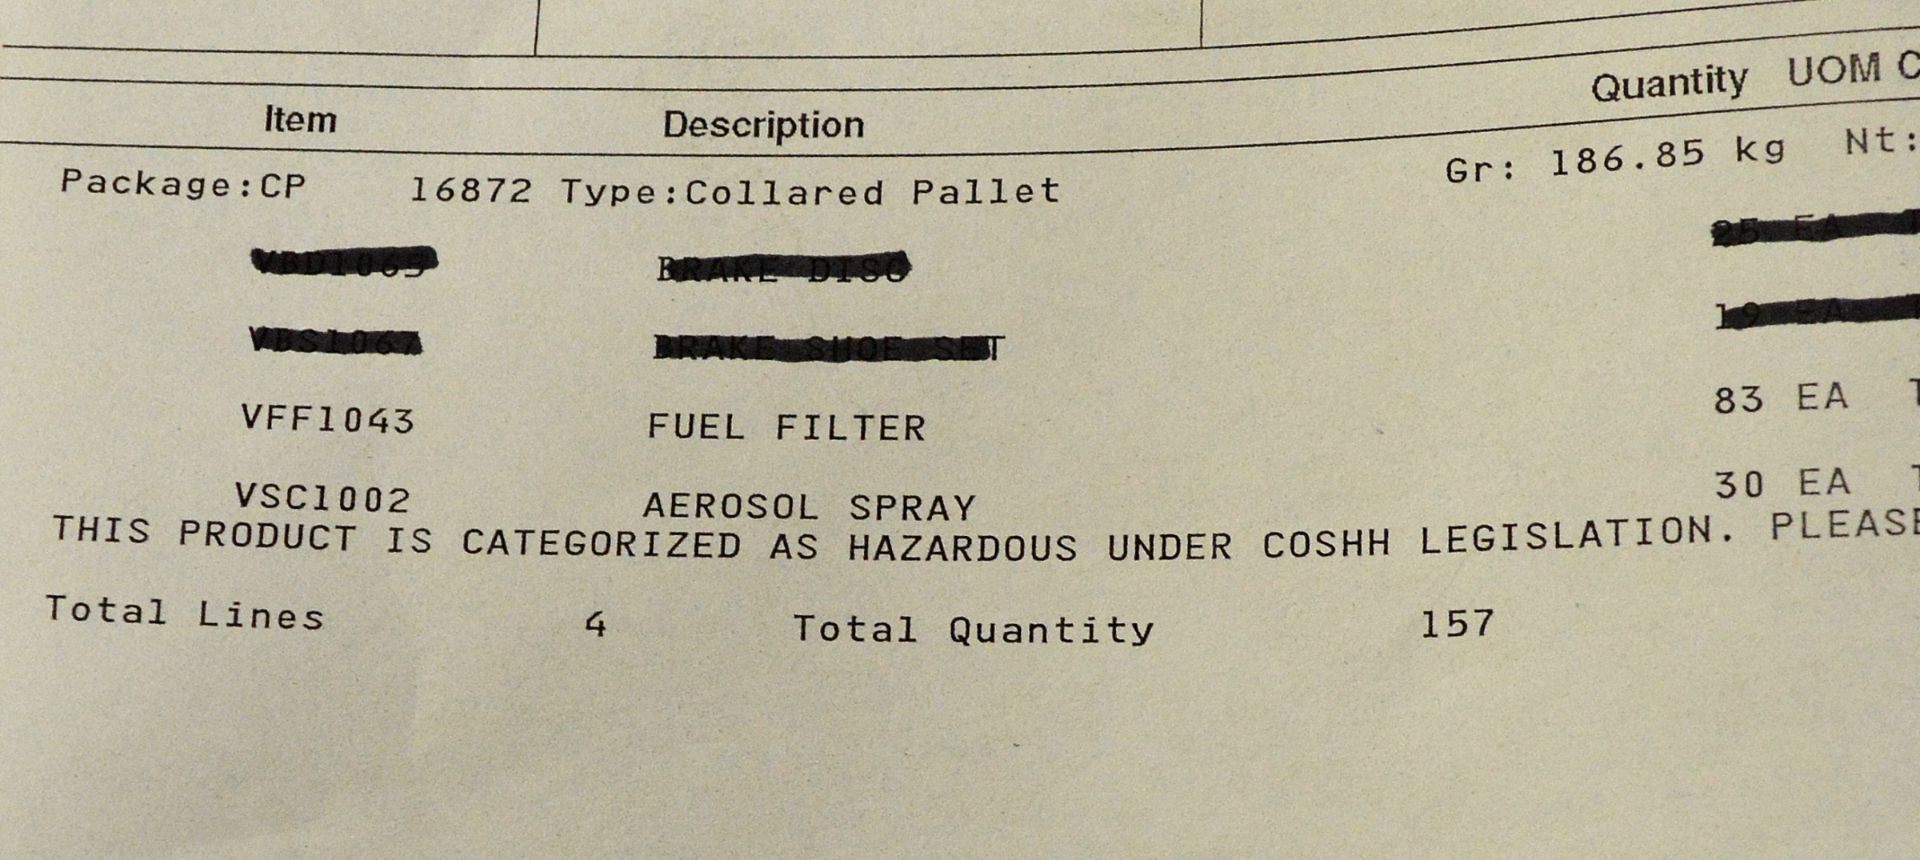 Vehicle parts - AC-90 multipurpose lubricant, fuel filters - see picture for itinerary for - Image 6 of 6